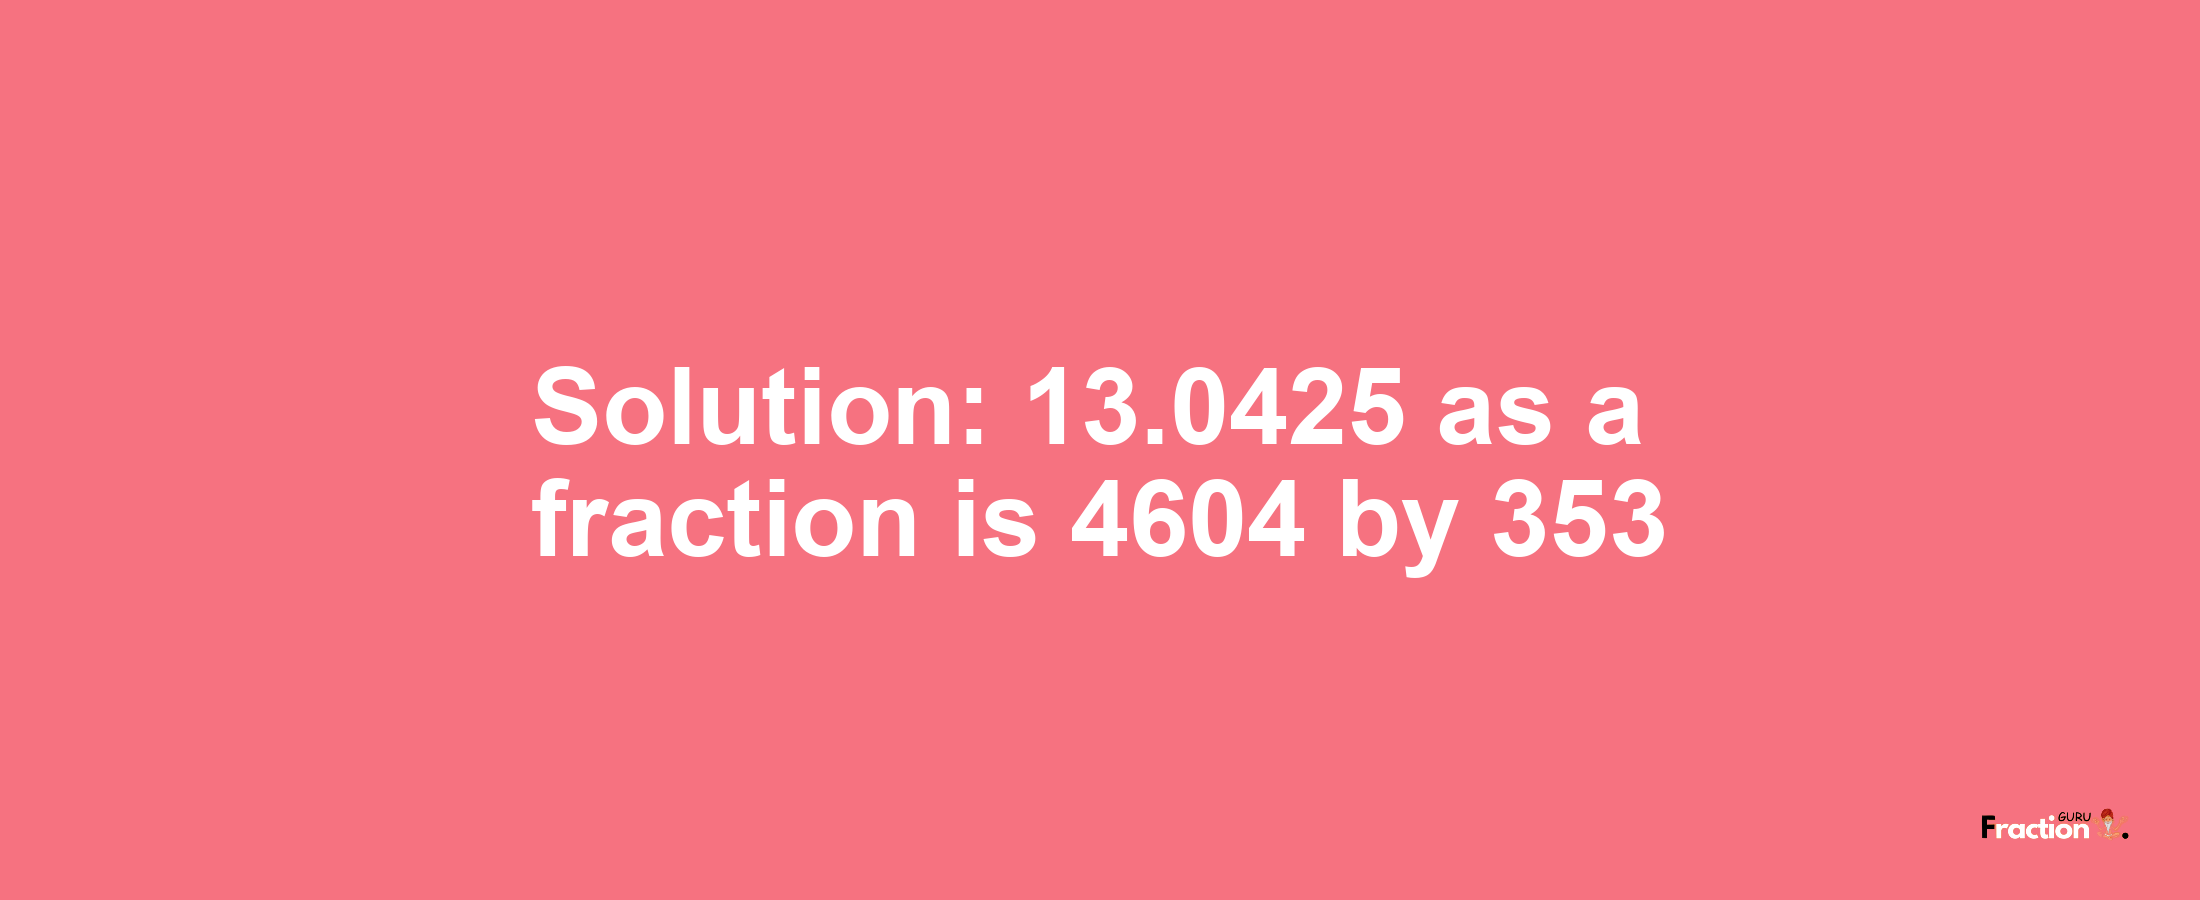 Solution:13.0425 as a fraction is 4604/353